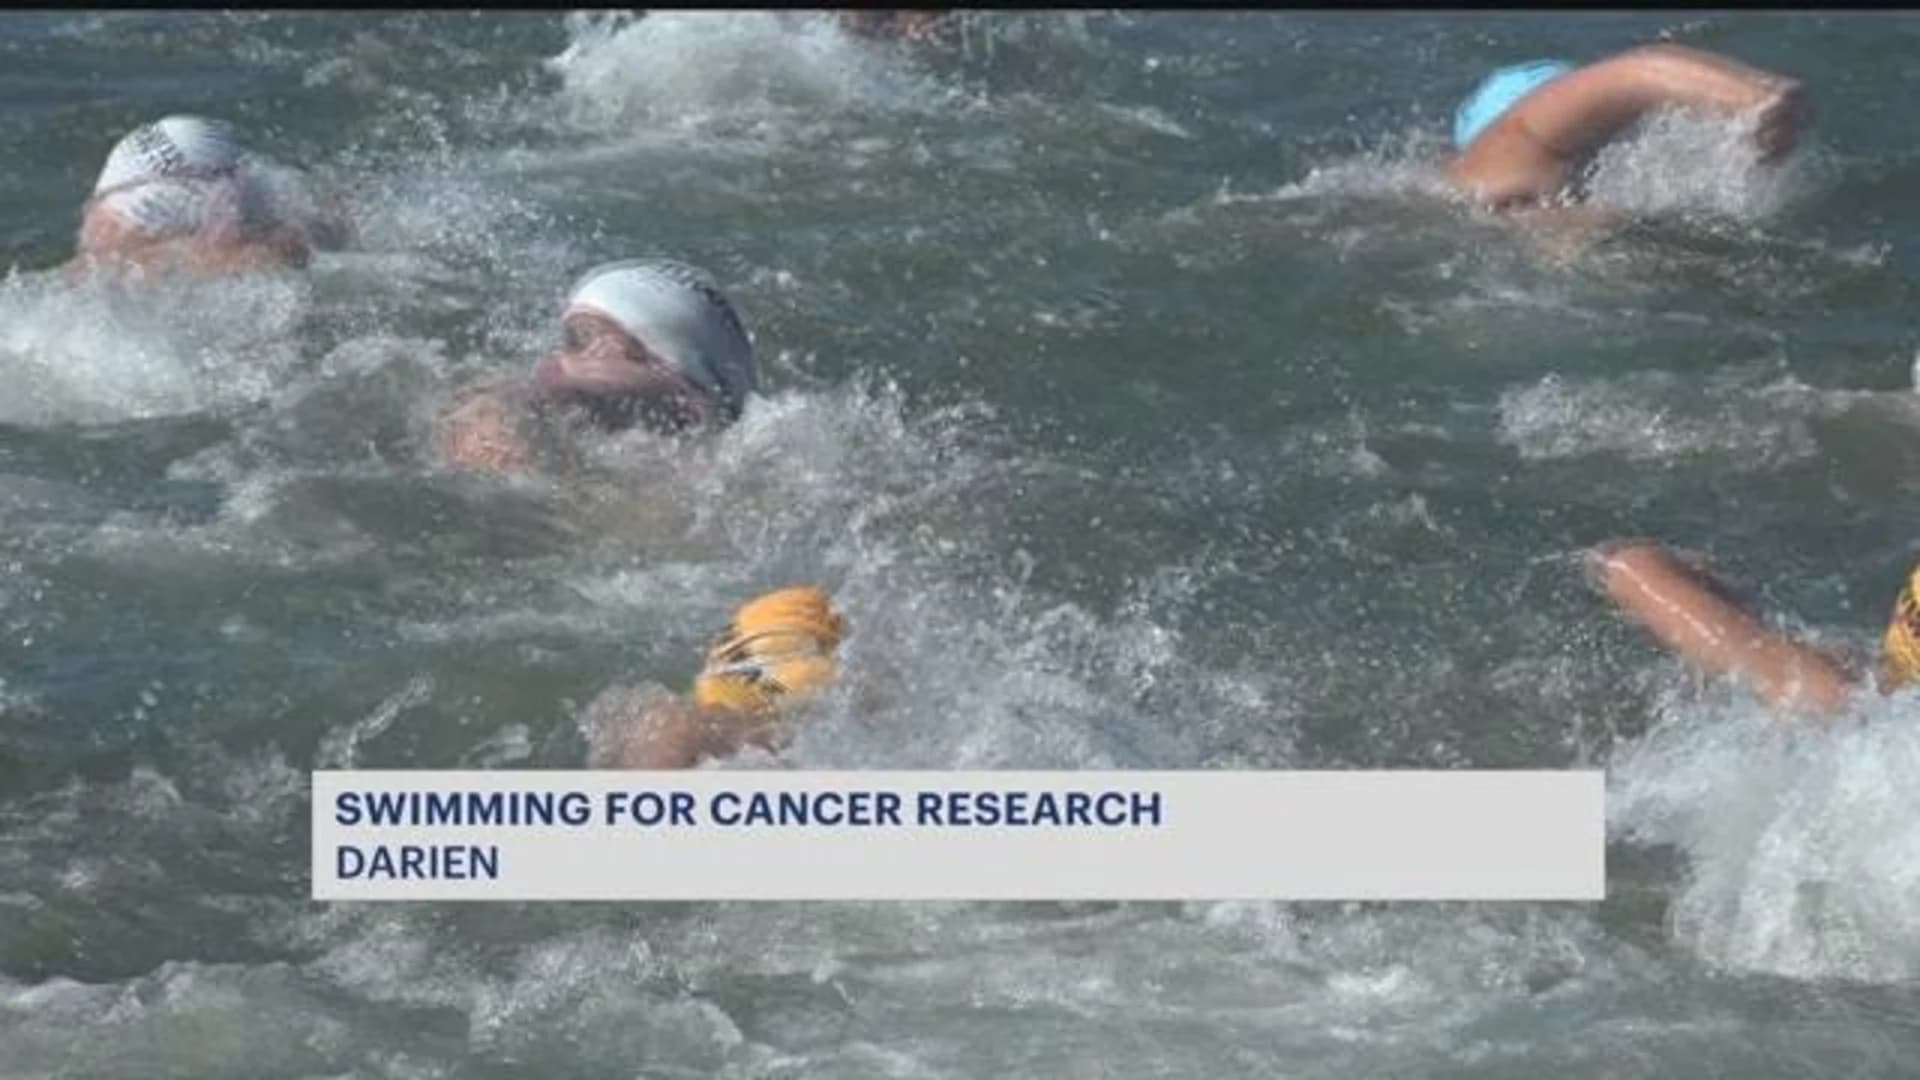 On A Positive Note - Swim team raises cancer research funds and more good news